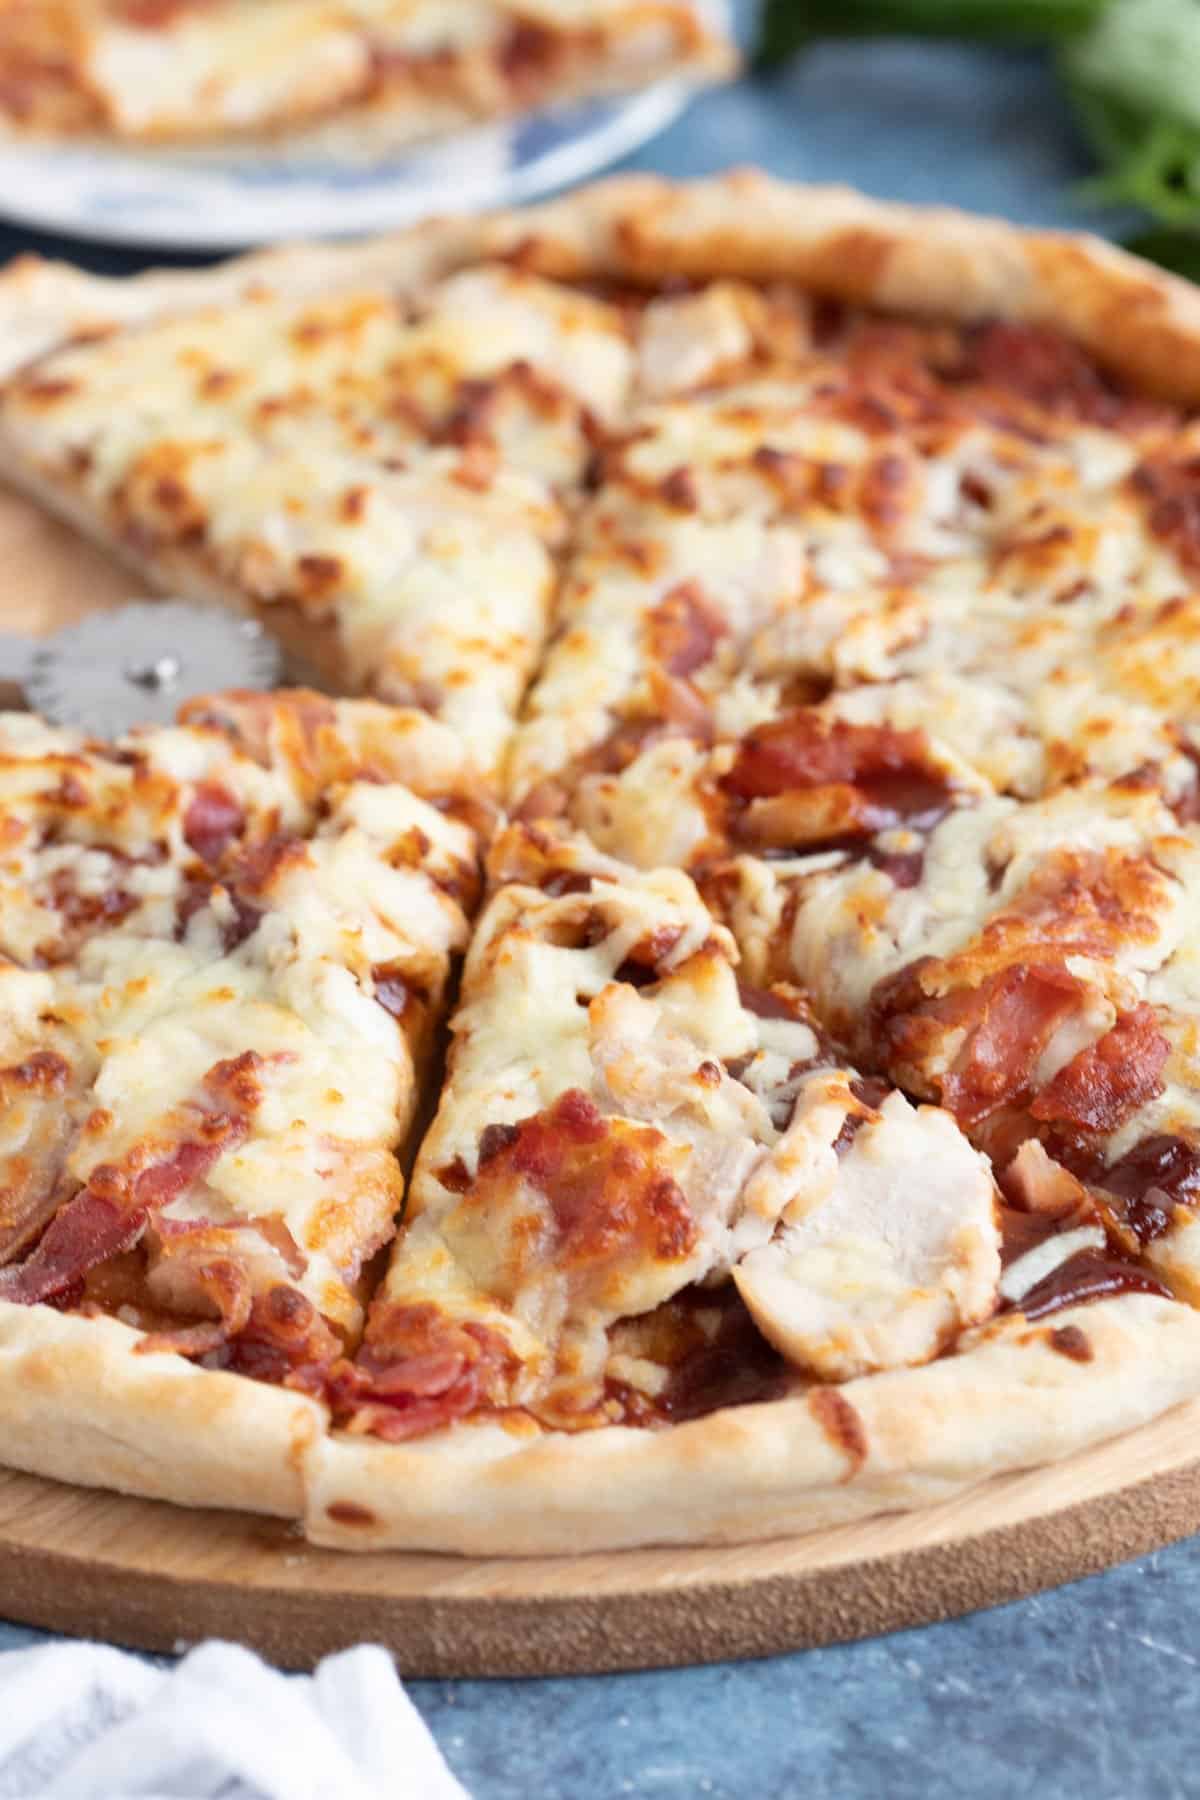 BBQ chicken and bacon pizza cut into slices.